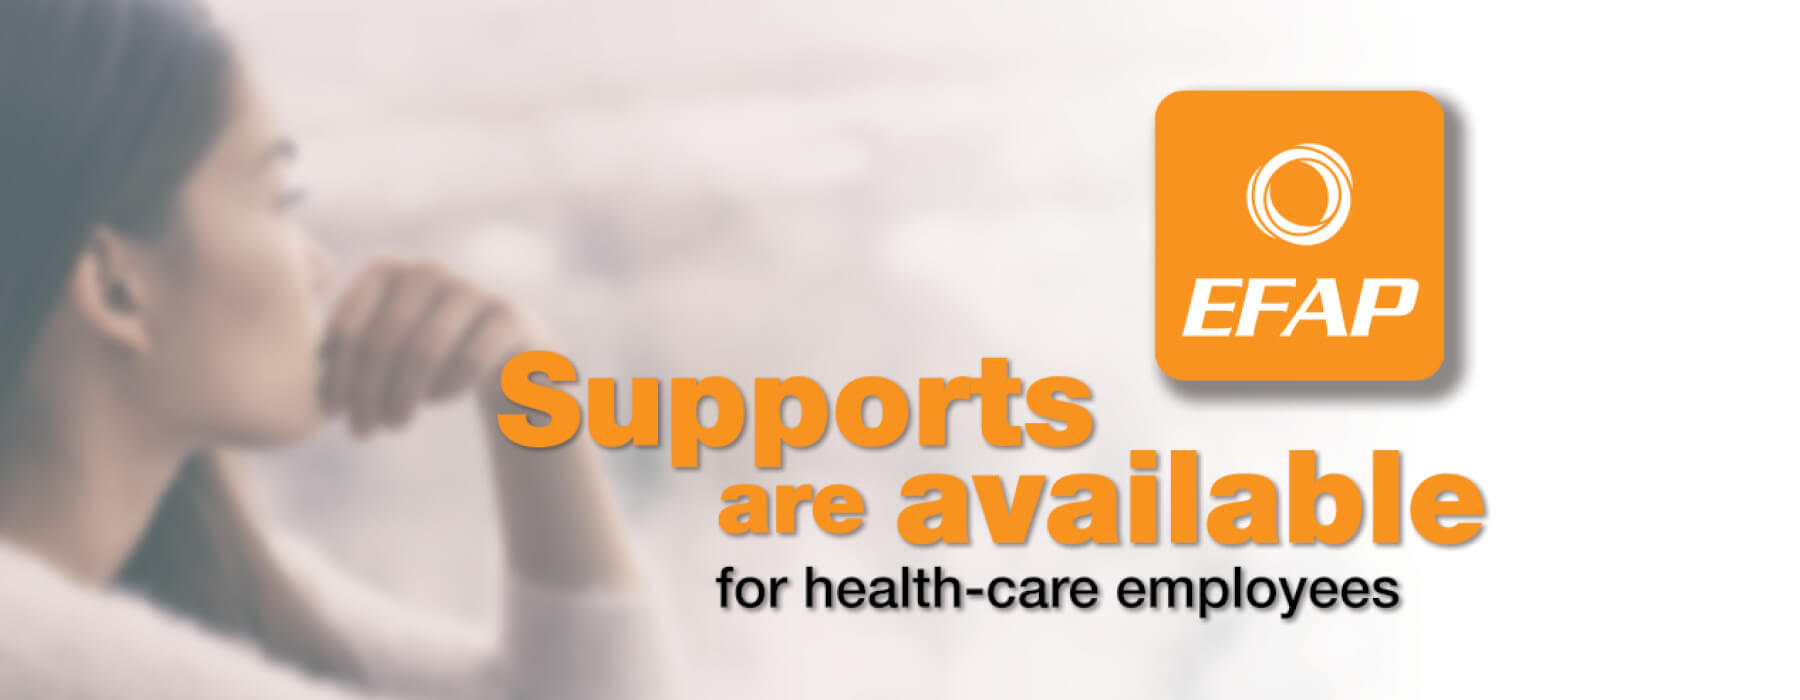 Supports are available for Saskatchewan health-care employees